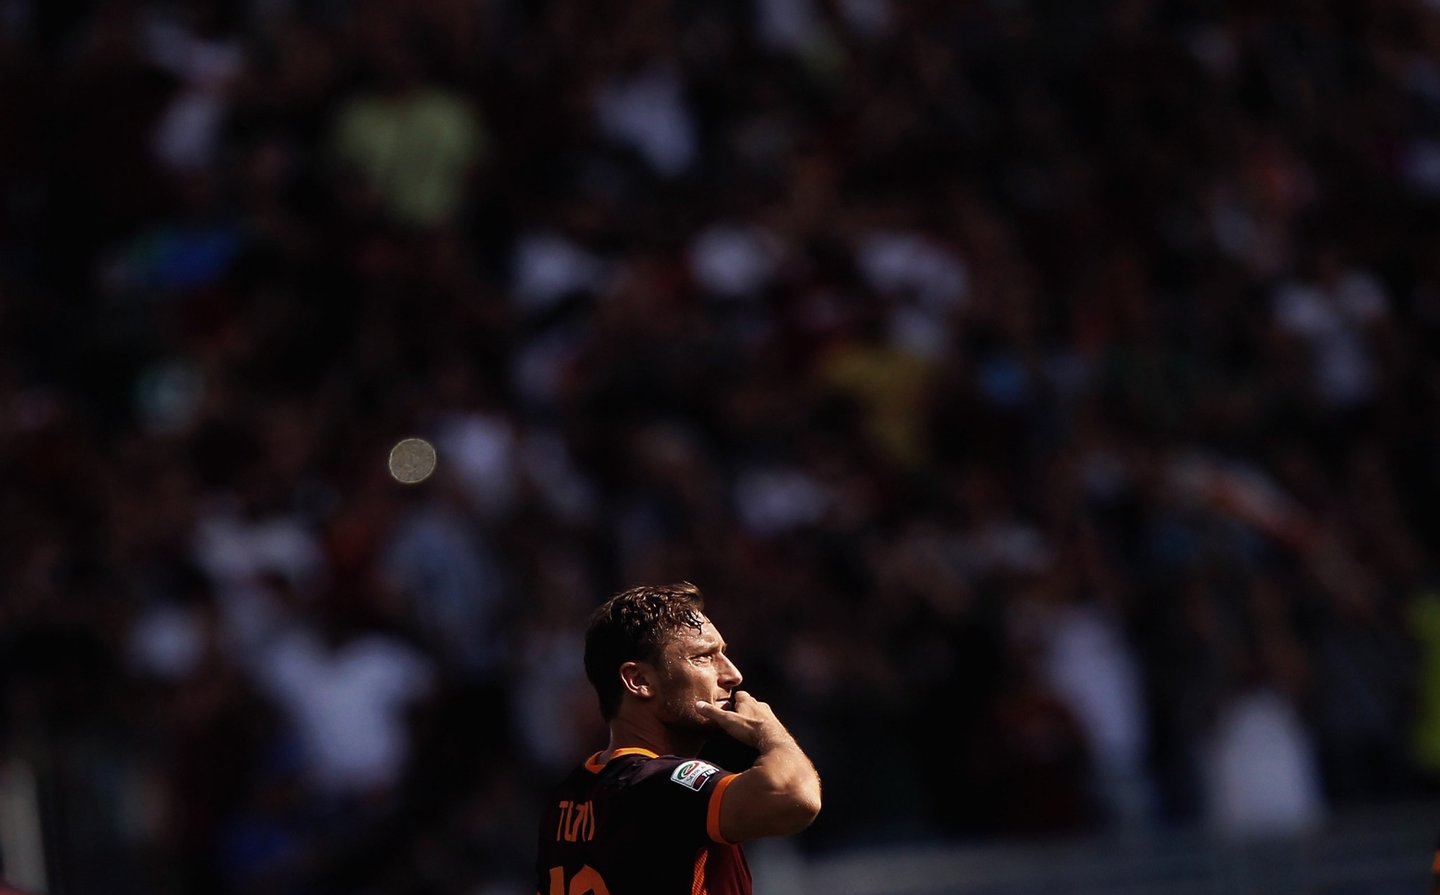 ROME, ITALY - SEPTEMBER 20: Francesco Totti of AS Roma looks on during the Serie A match between AS Roma and US Sassuolo Calcio at Stadio Olimpico on September 20, 2015 in Rome, Italy. (Photo by Paolo Bruno/Getty Images)